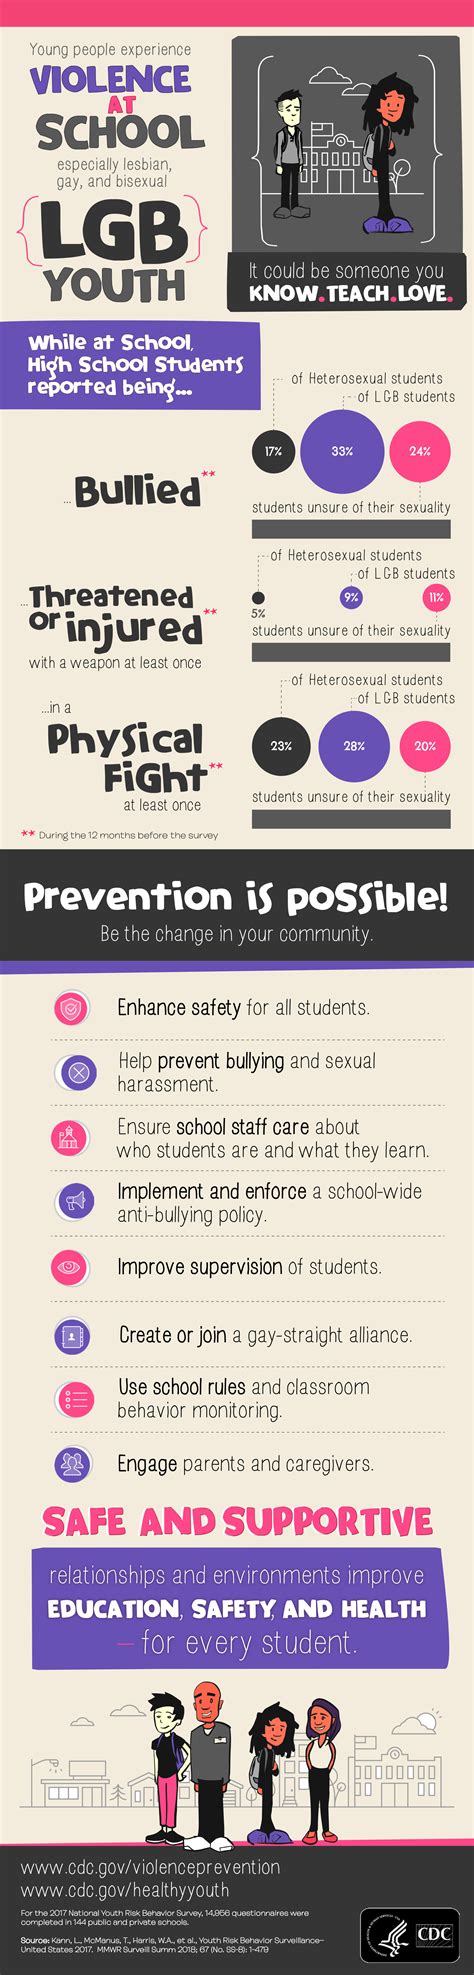 LGB Youth Report School Violence |Violence Prevention |Violence Prevention|Injury Center|CDC